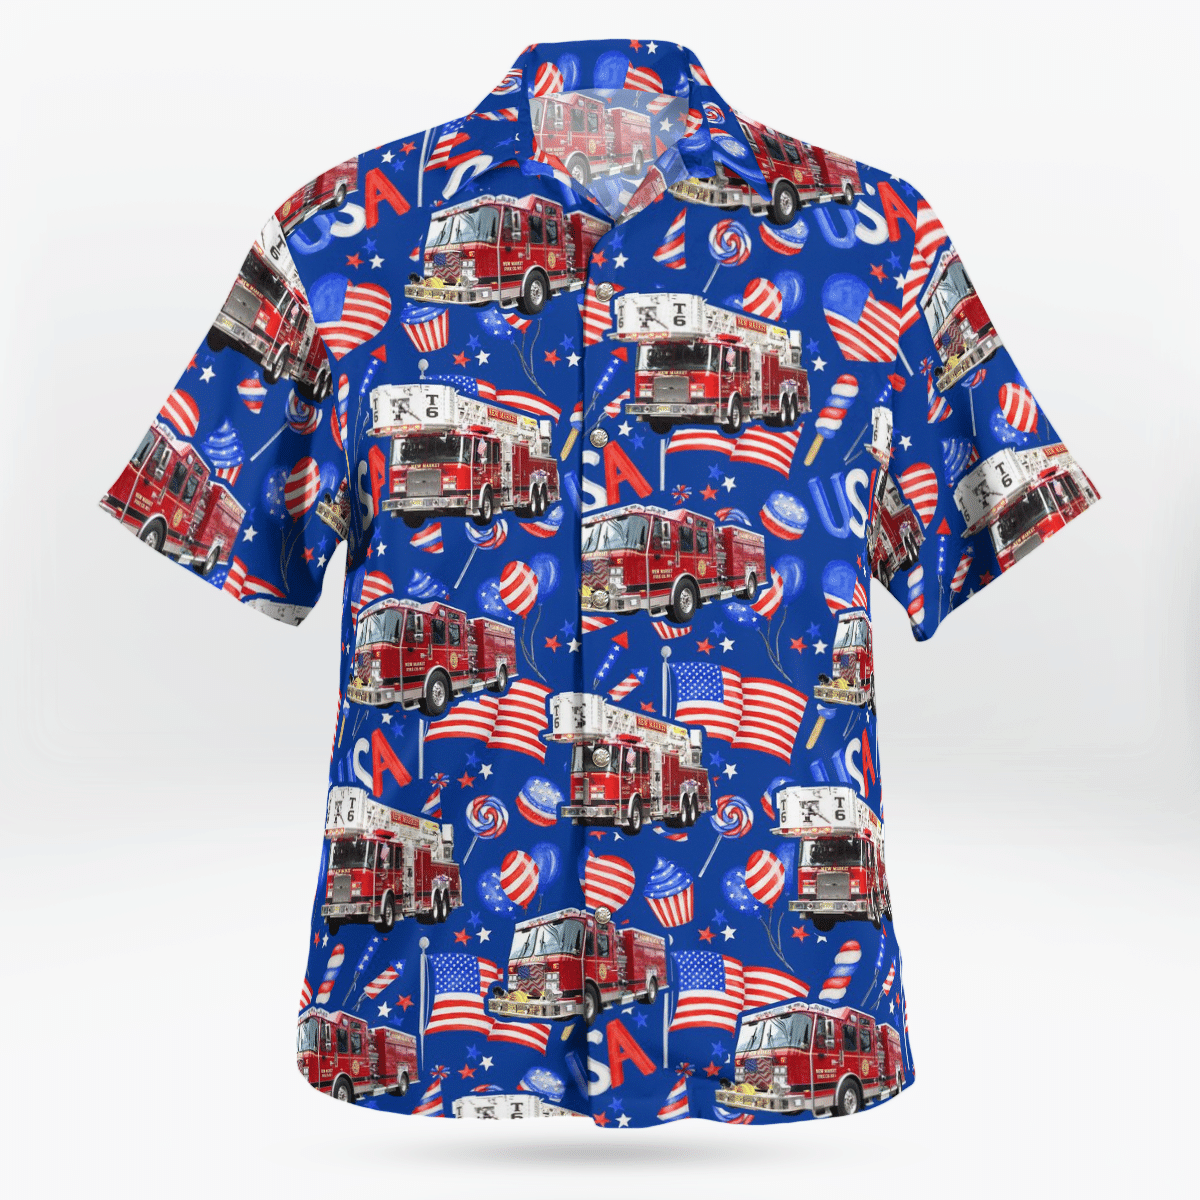 HOT Piscataway, New Jersey, New Market Volunteer Fire Company 1, 4th of July Tropical Shirt1